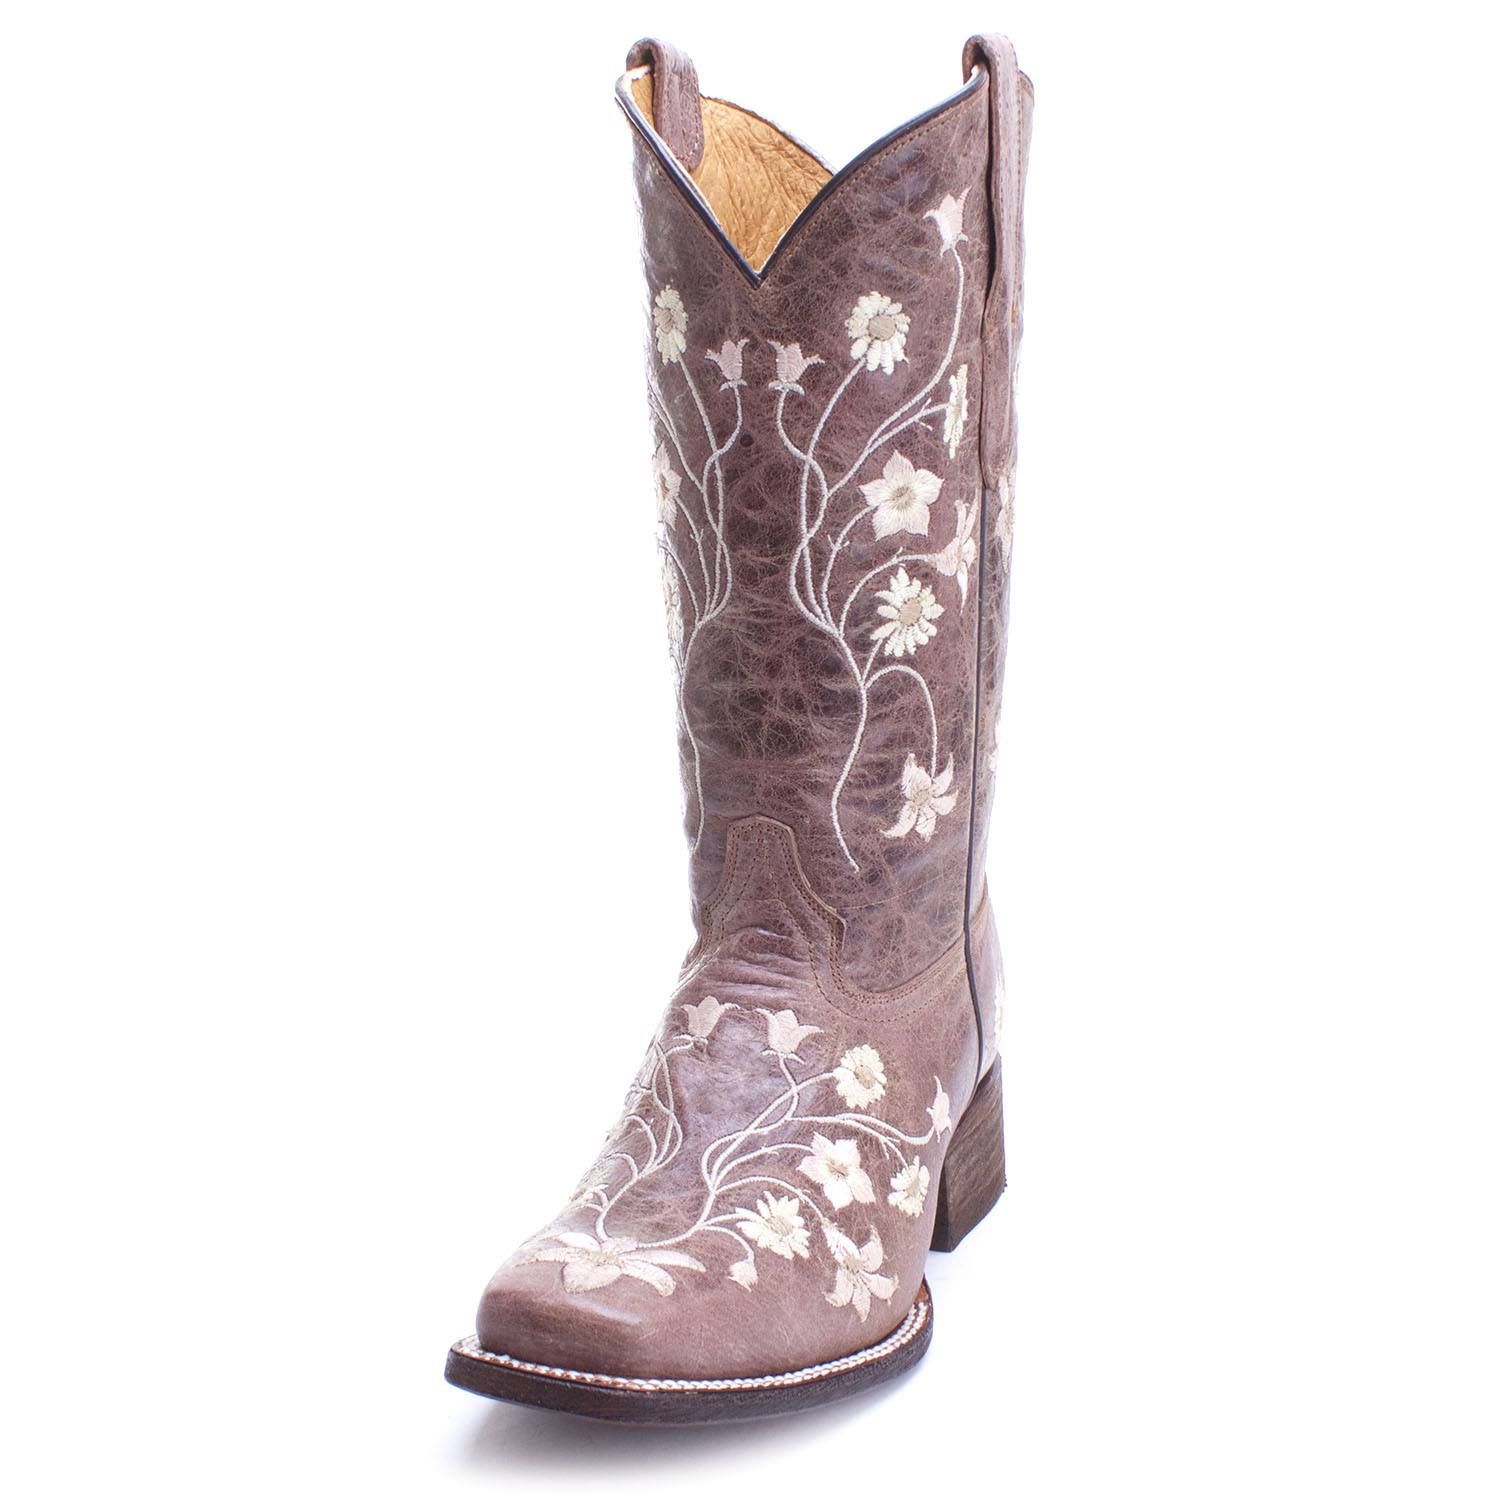 Kids Wedding Cowboy Boots White Floral Leather Rodeo Western Wear Snip Toe Youth